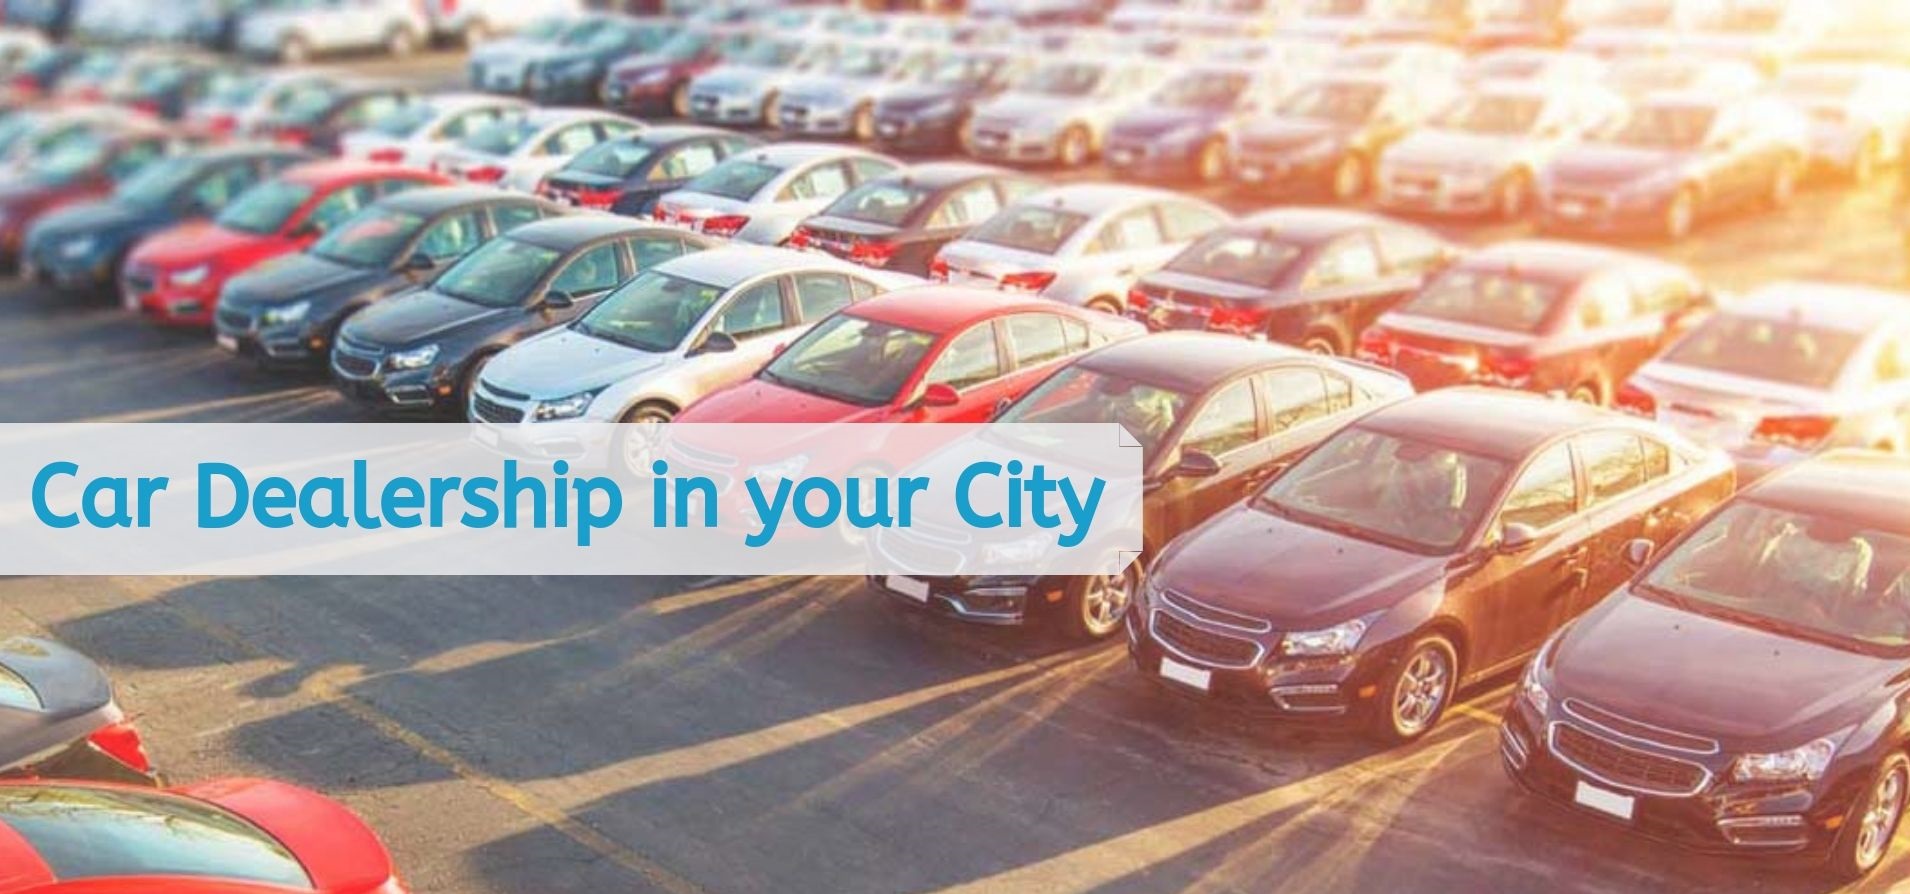 Things to keep in Mind while Finding a used Car Dealership in your City